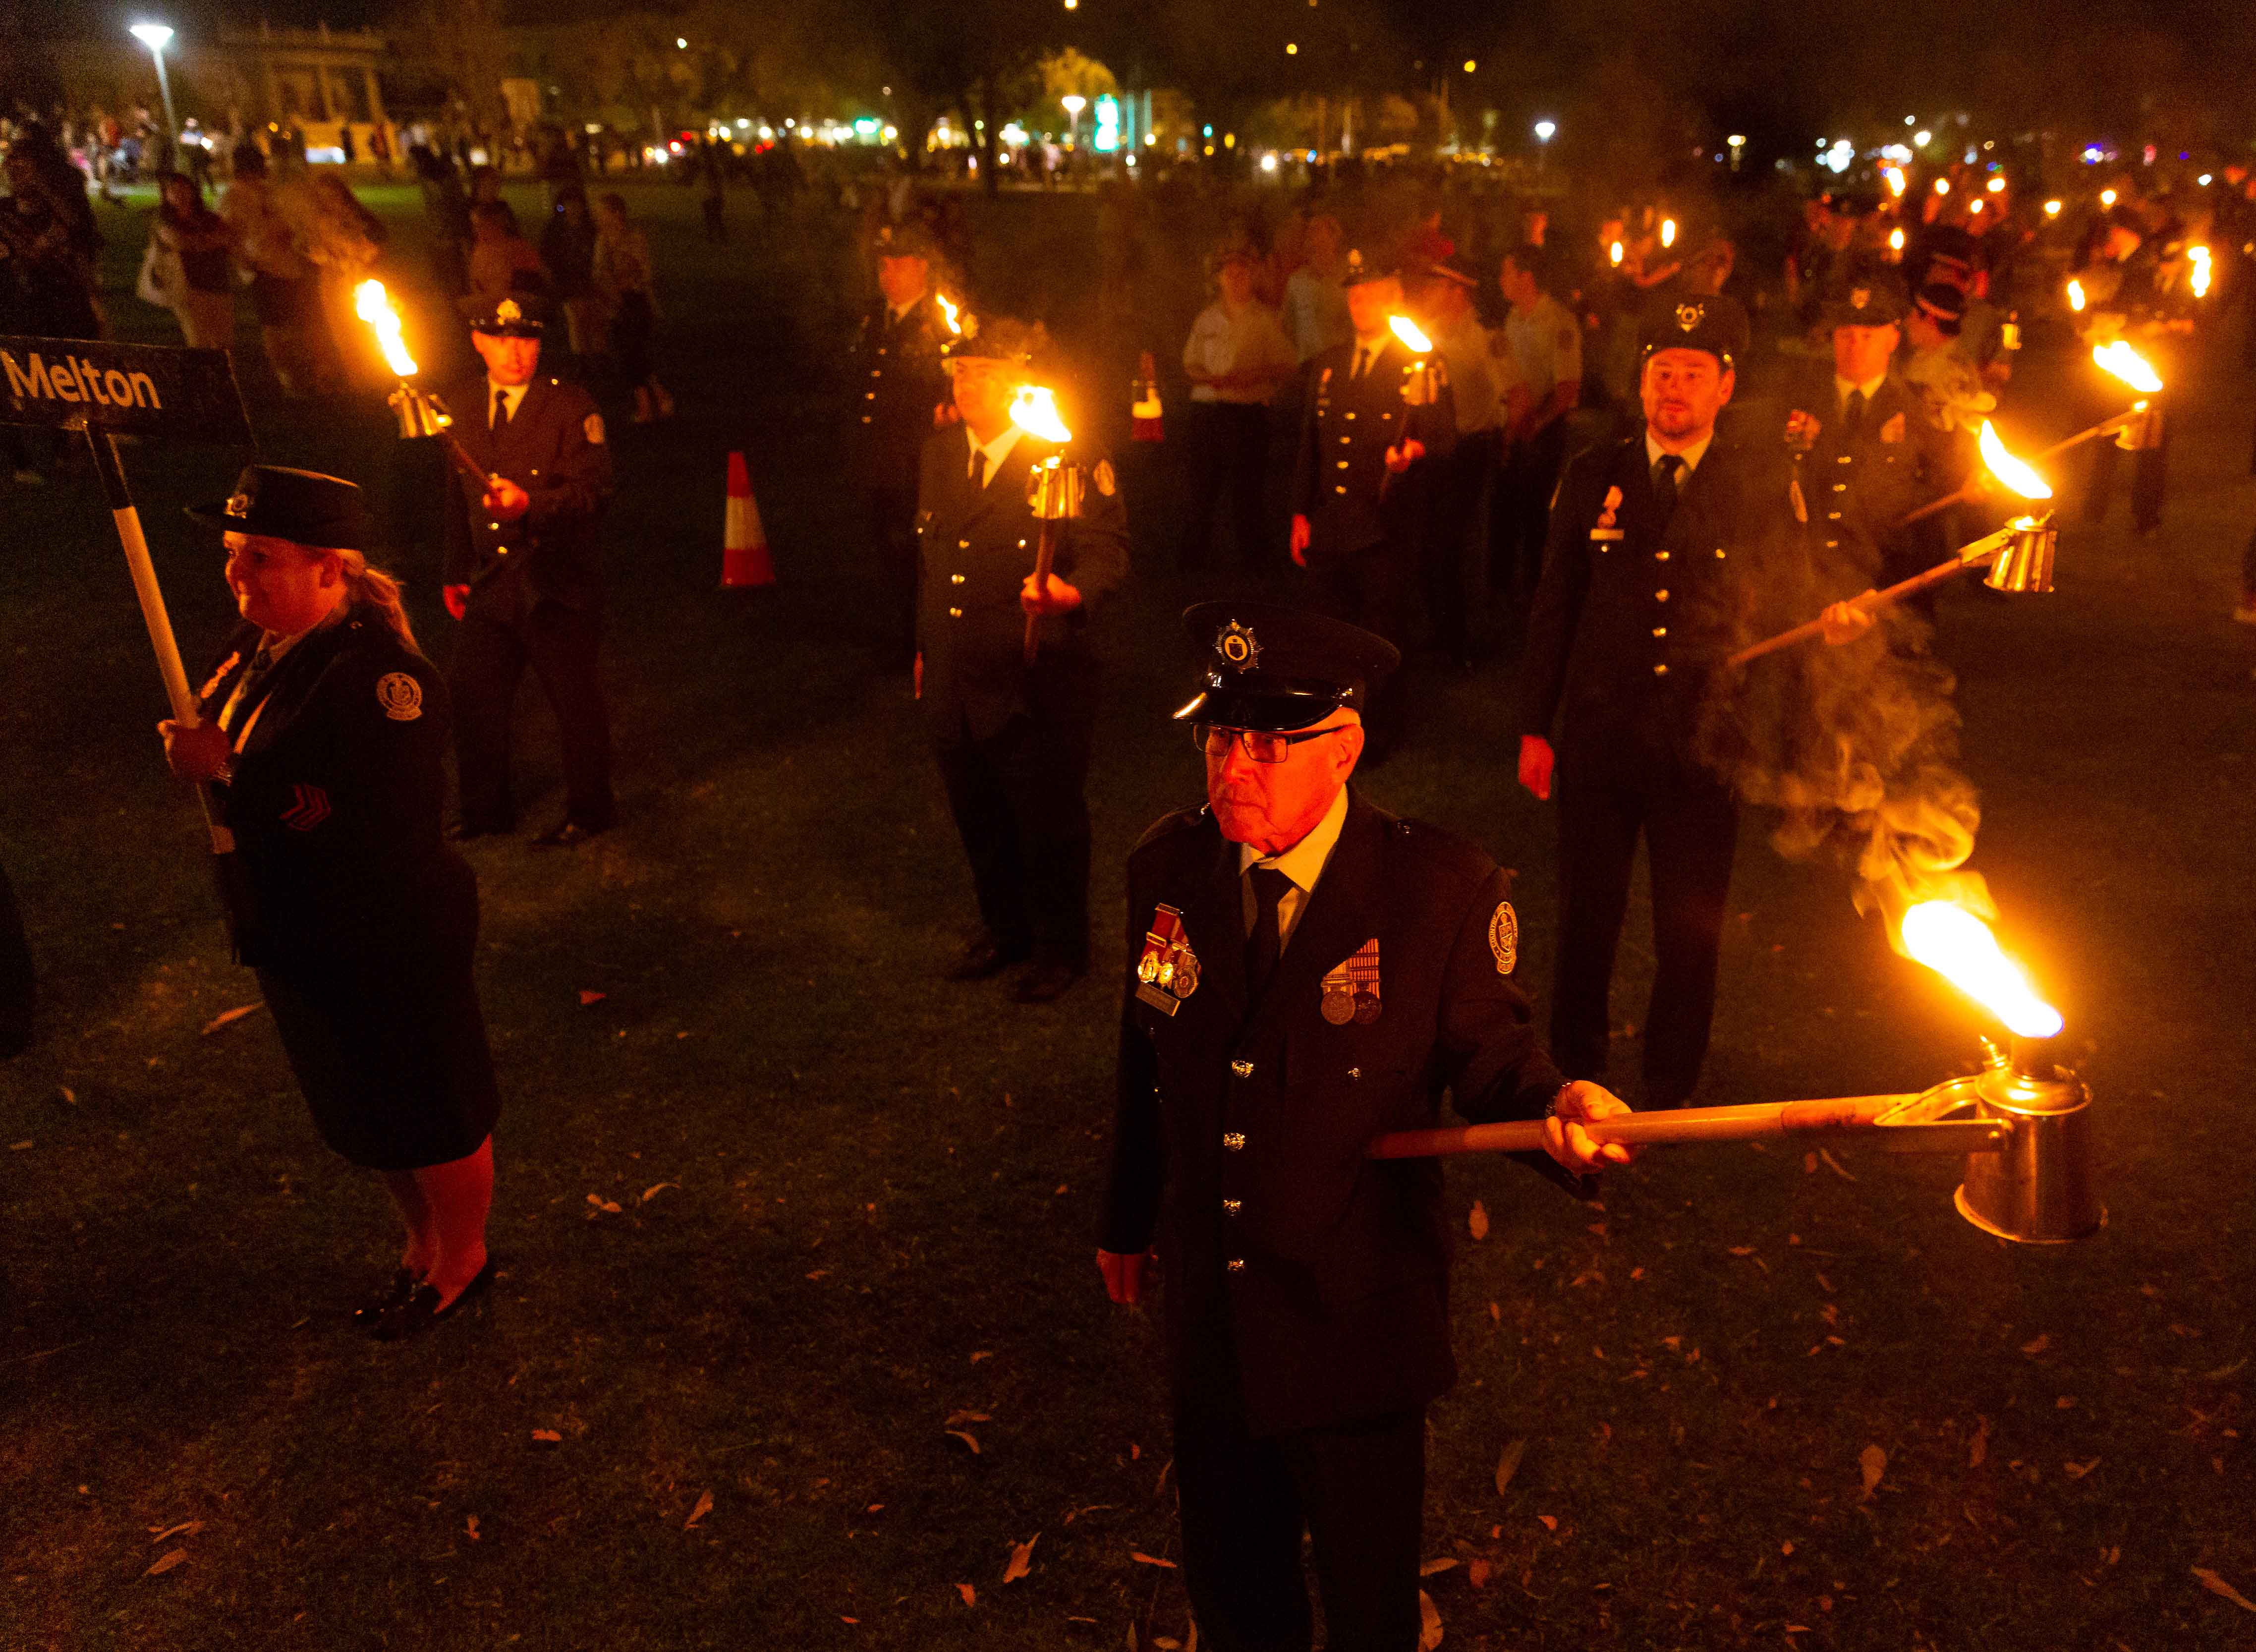 Image of torchlight procession